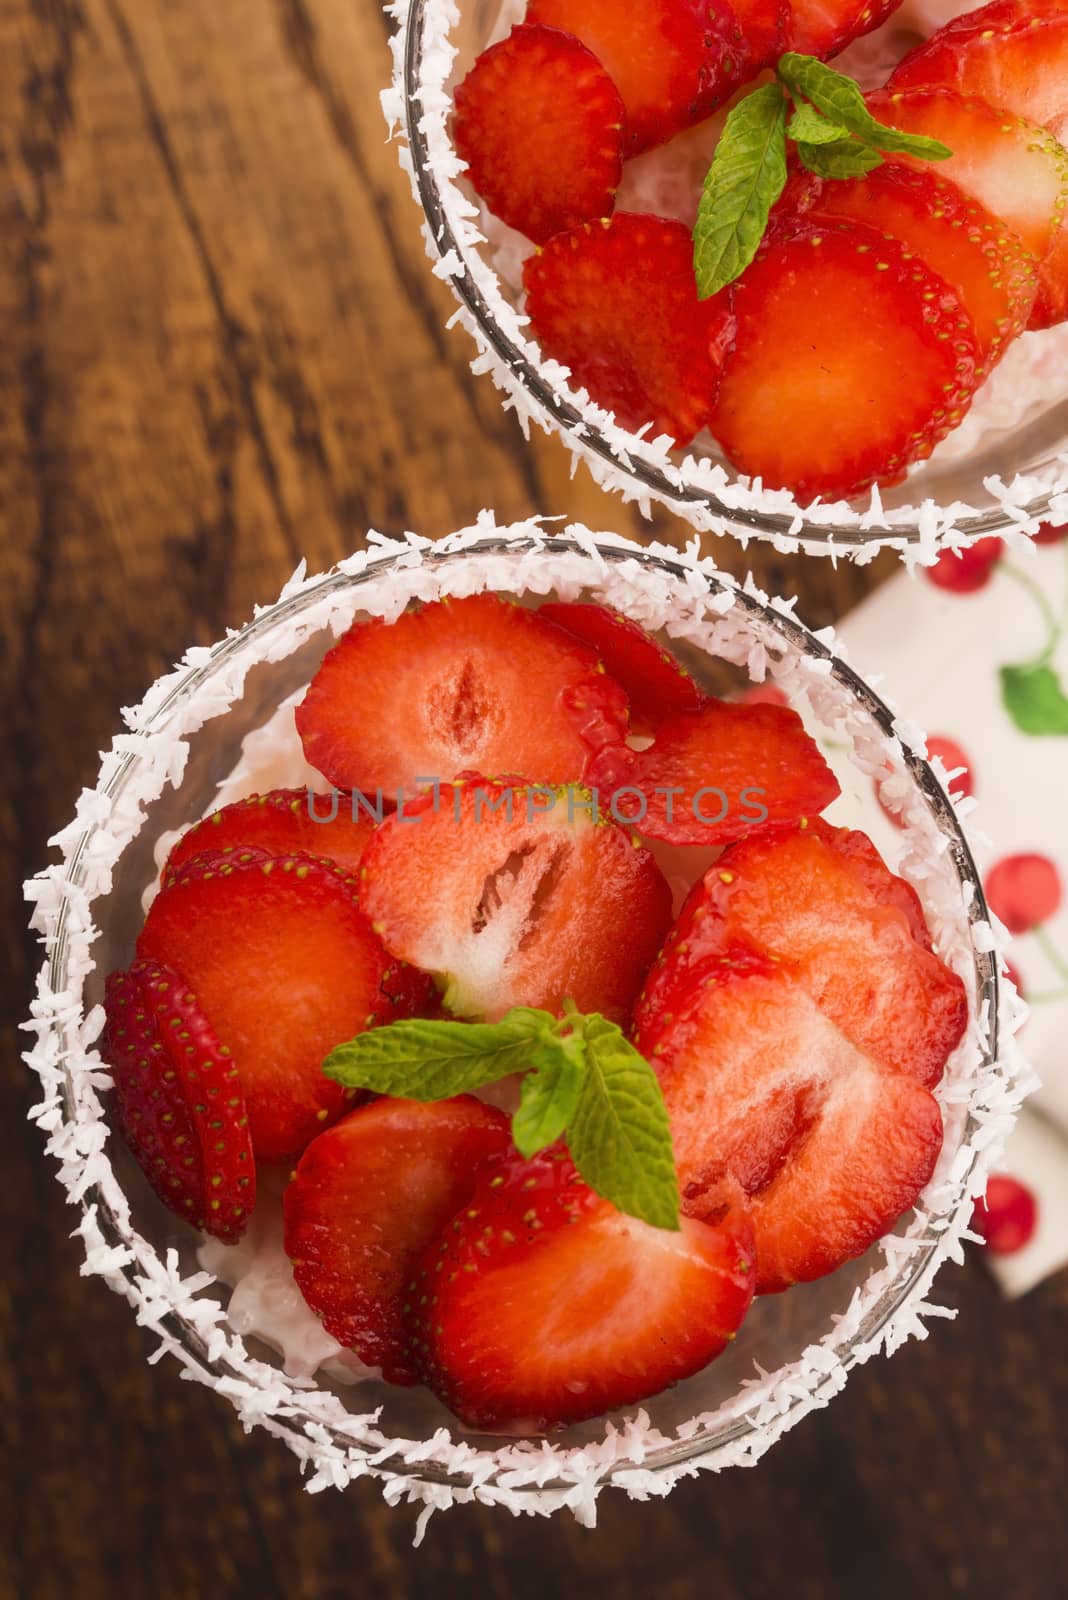 A serving of strawberry over tapioca and jelly by joannawnuk